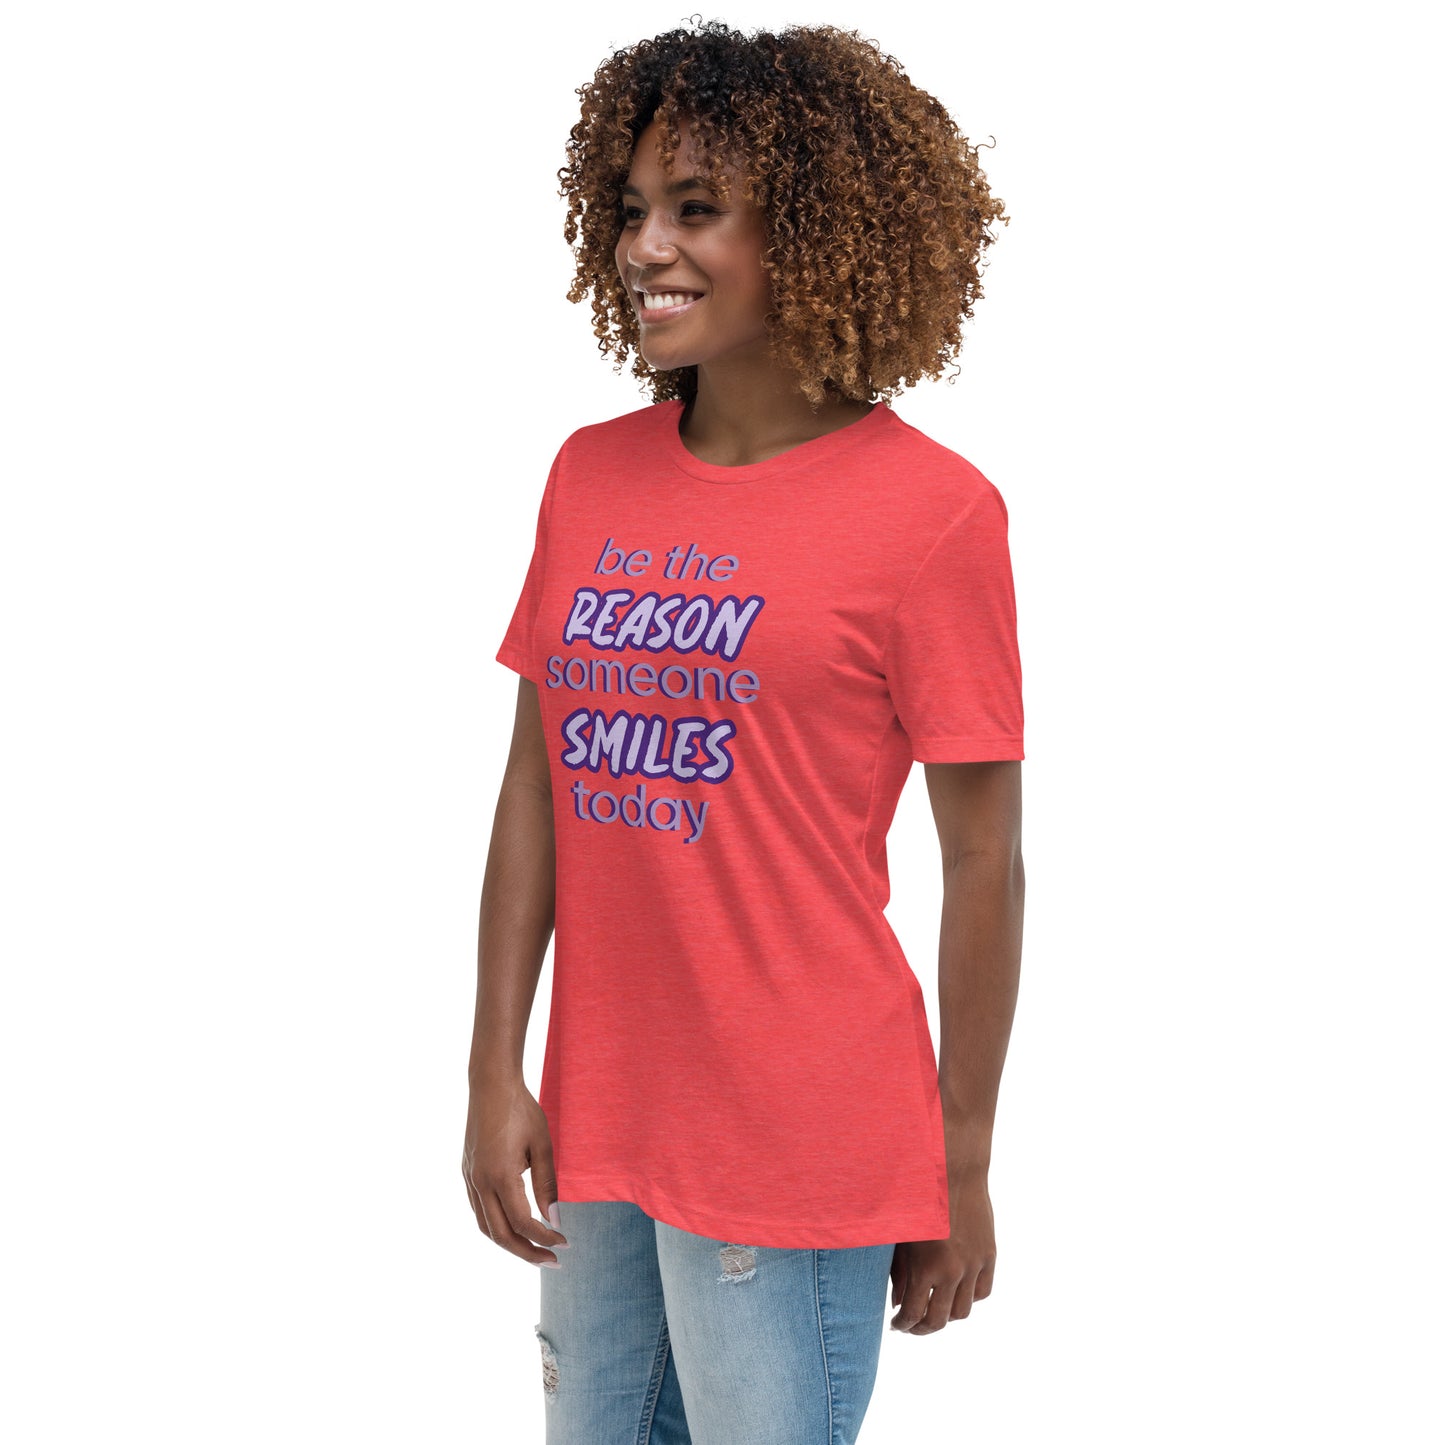 Woman with red T-shirt and the quote "be the reason someone smiles today" in purple on it. 